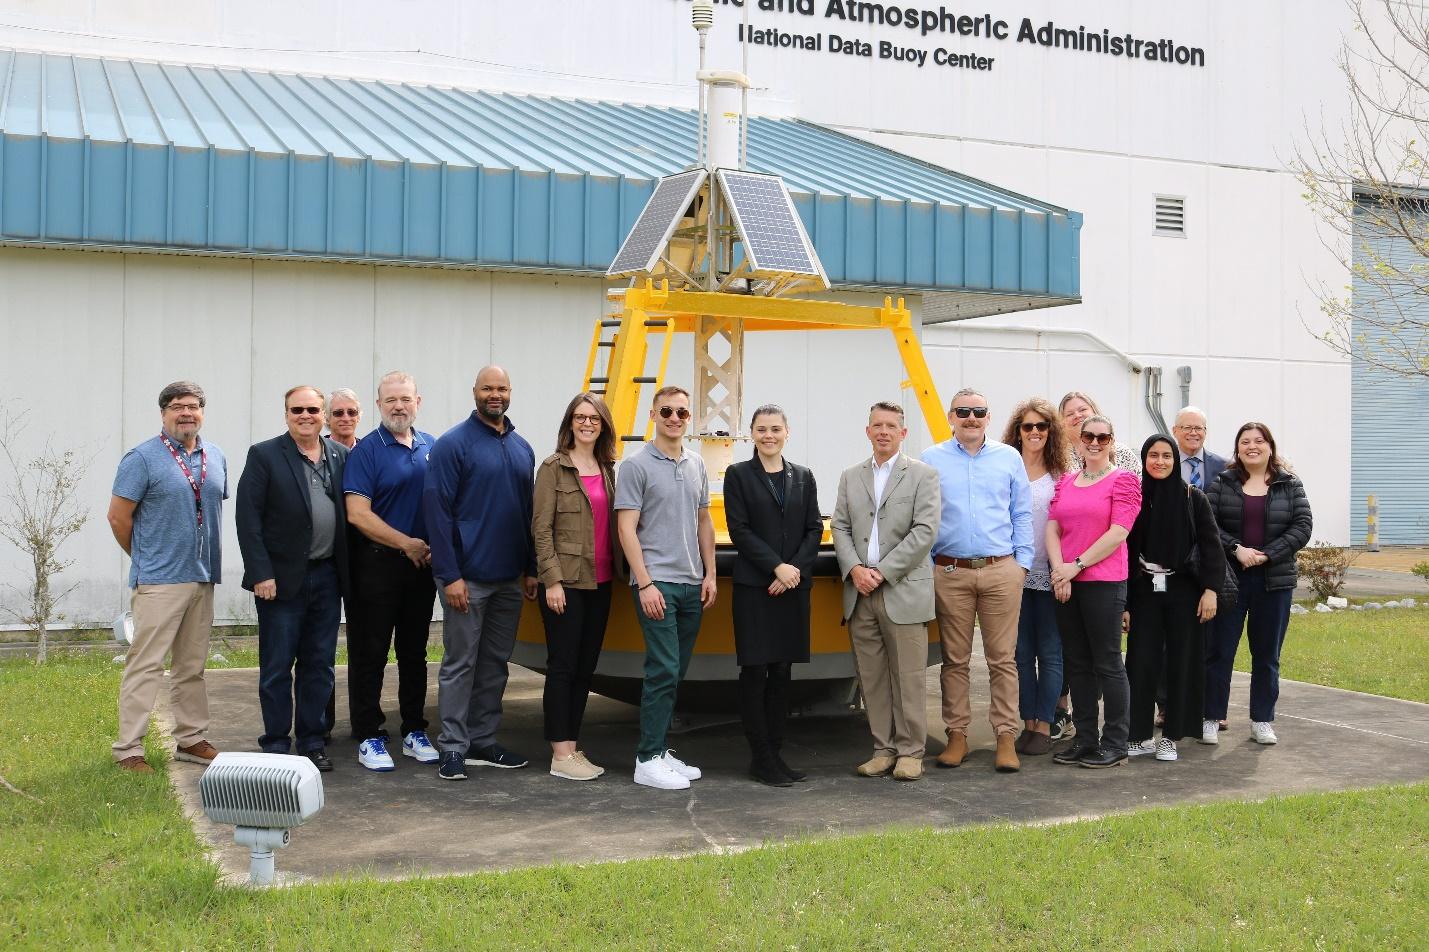 NOAA Office of Research, Transition, and Application (ORTA) Conducts Outreach with NOAA Offices and Local Partners in Gulfport, MS Area